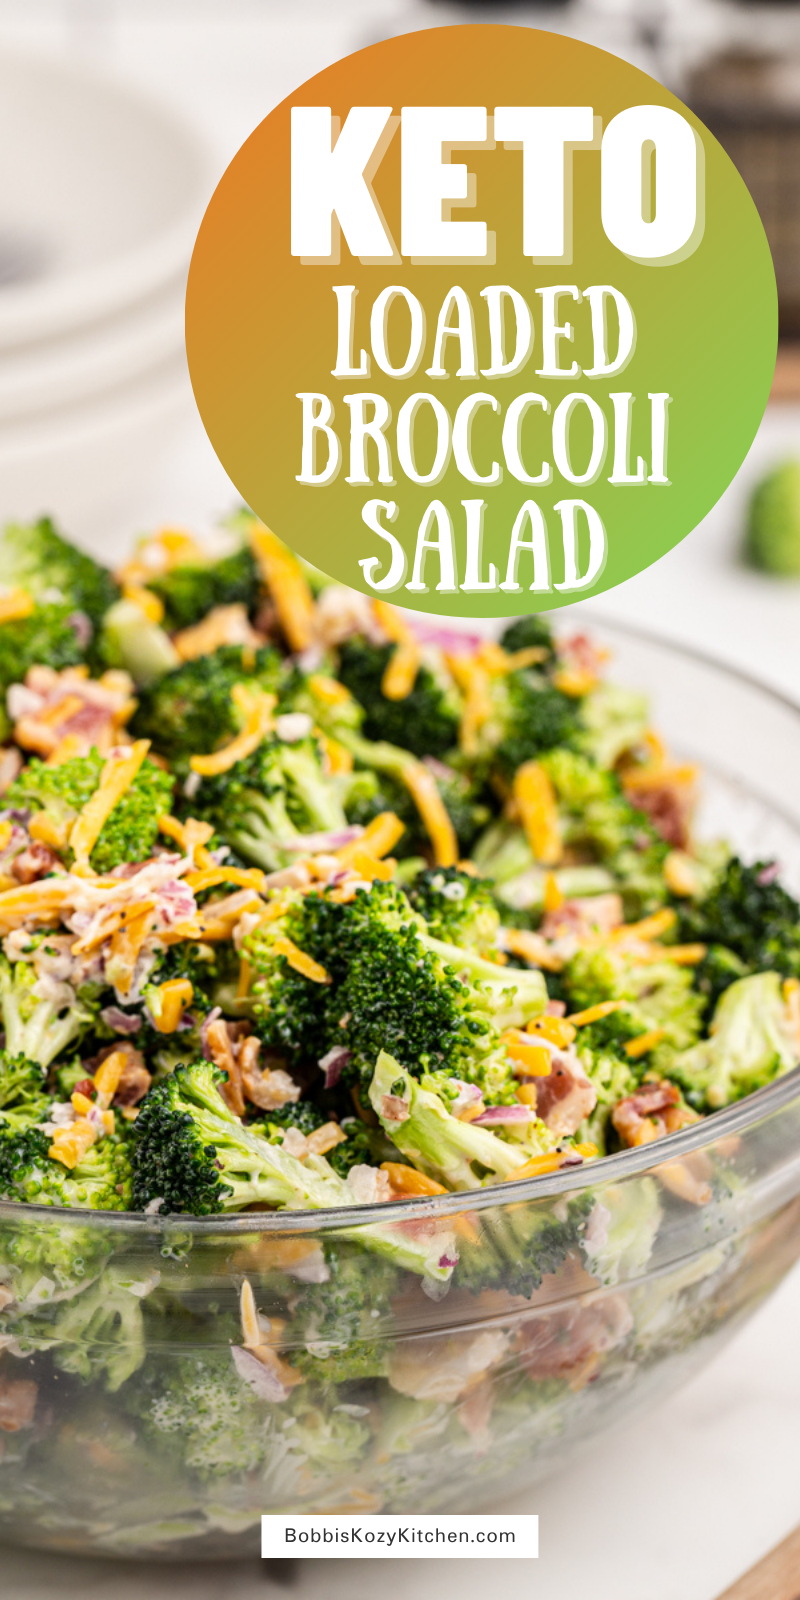 Loaded Broccoli Salad - This Loaded Broccoli Salad is the perfect low carb side dish. This delicious salad is filled with broccoli, bacon, red onion, cheese, and a homemade dressing your family will devour. #lowcarb #keto #broccoli #salad #bacon #cheese #onion